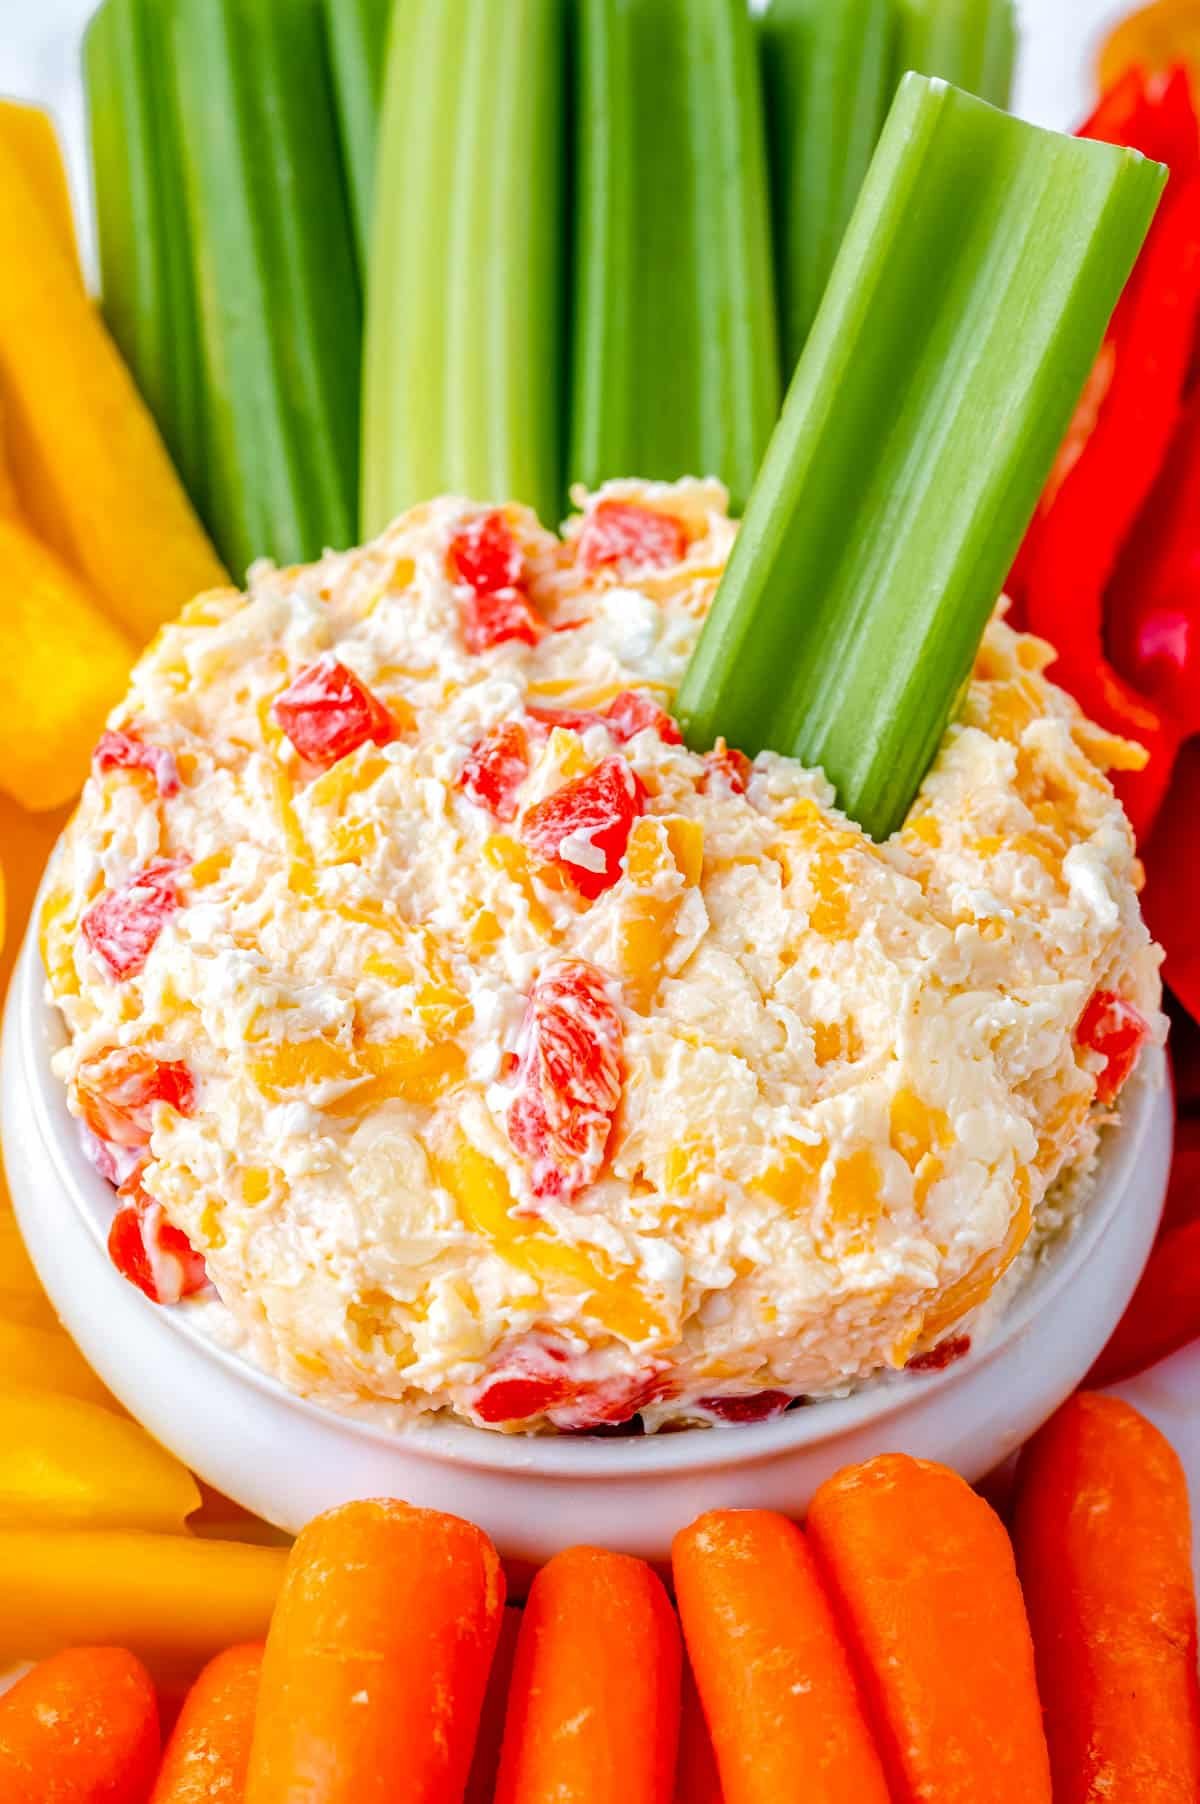 The finished Pimento Cheese recipe in a white serving bowl surrounded by veggie sticks.